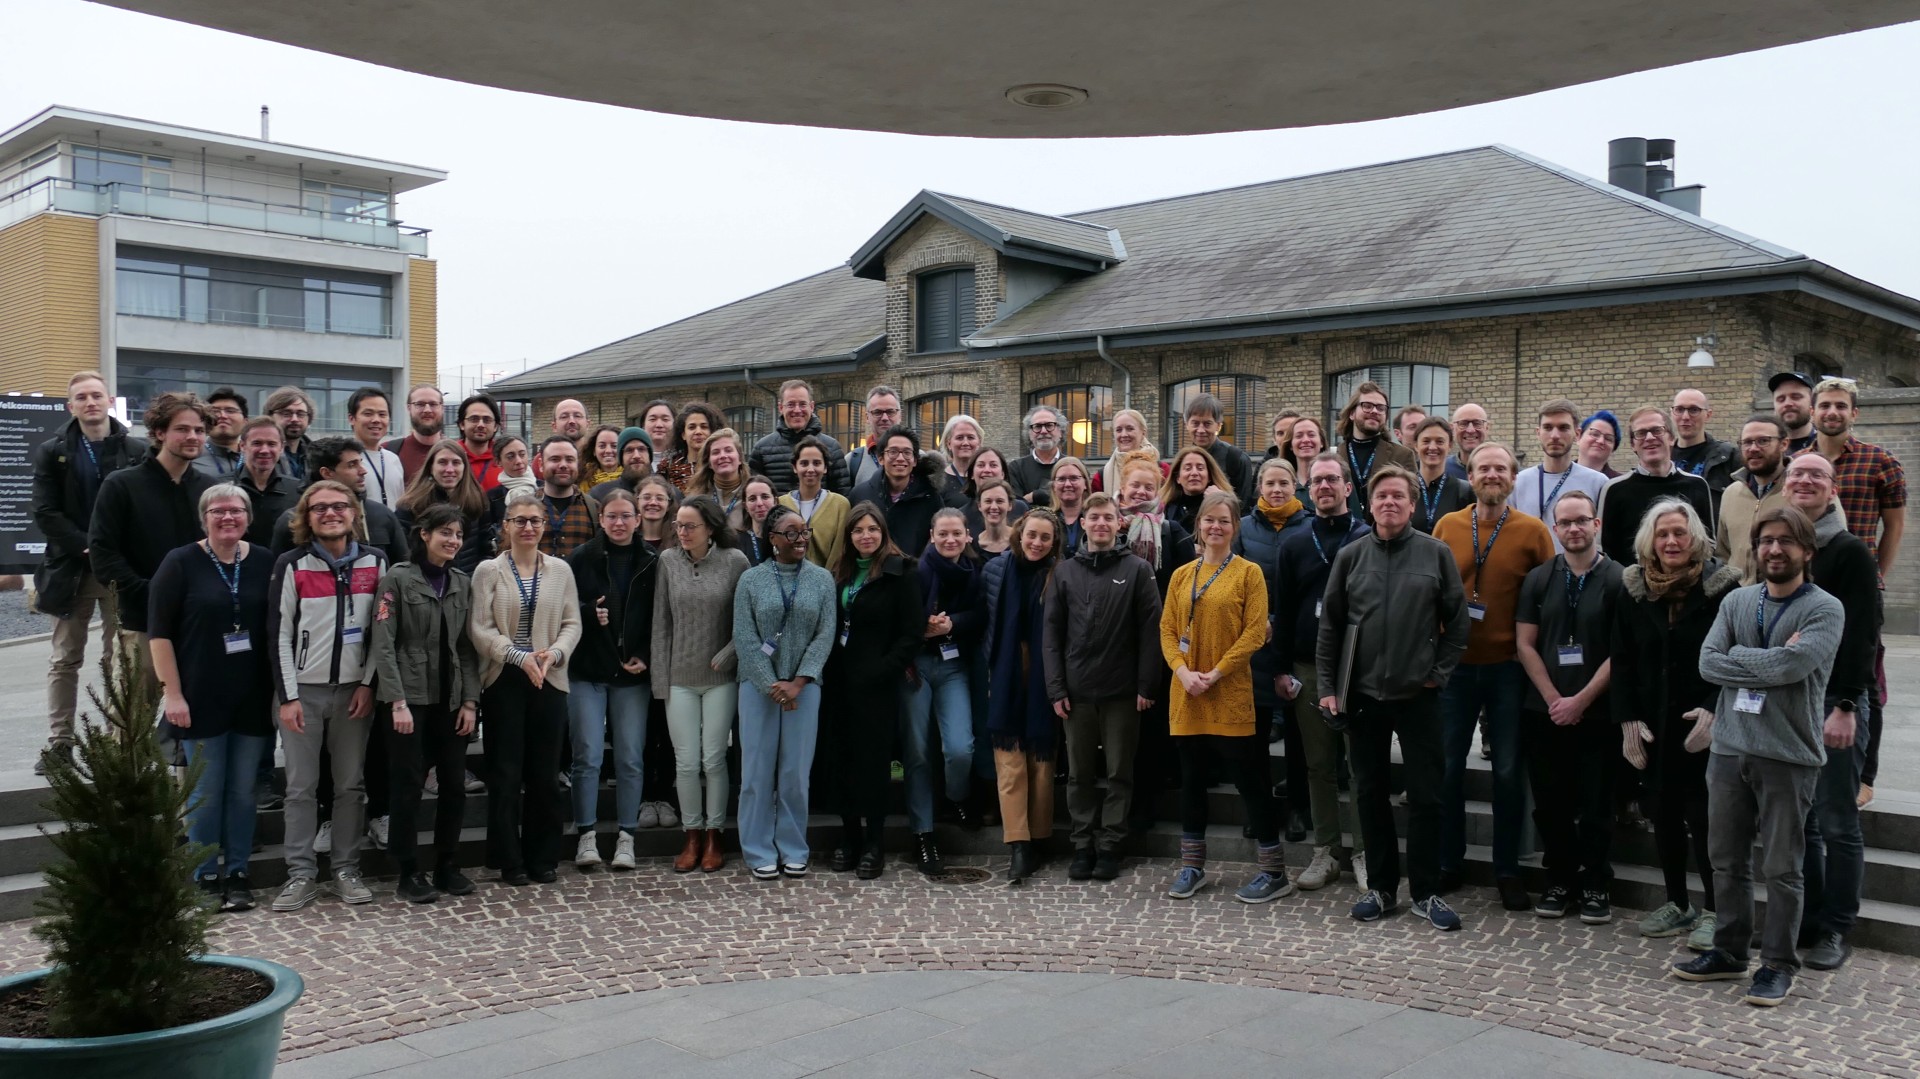 The year began with a joint retreat with another Scandinavian Centre of Excellence, Music in the Brain, from Aarhus University. Almost 100 participants were meeting in Copenhagen for academic and social exchange.